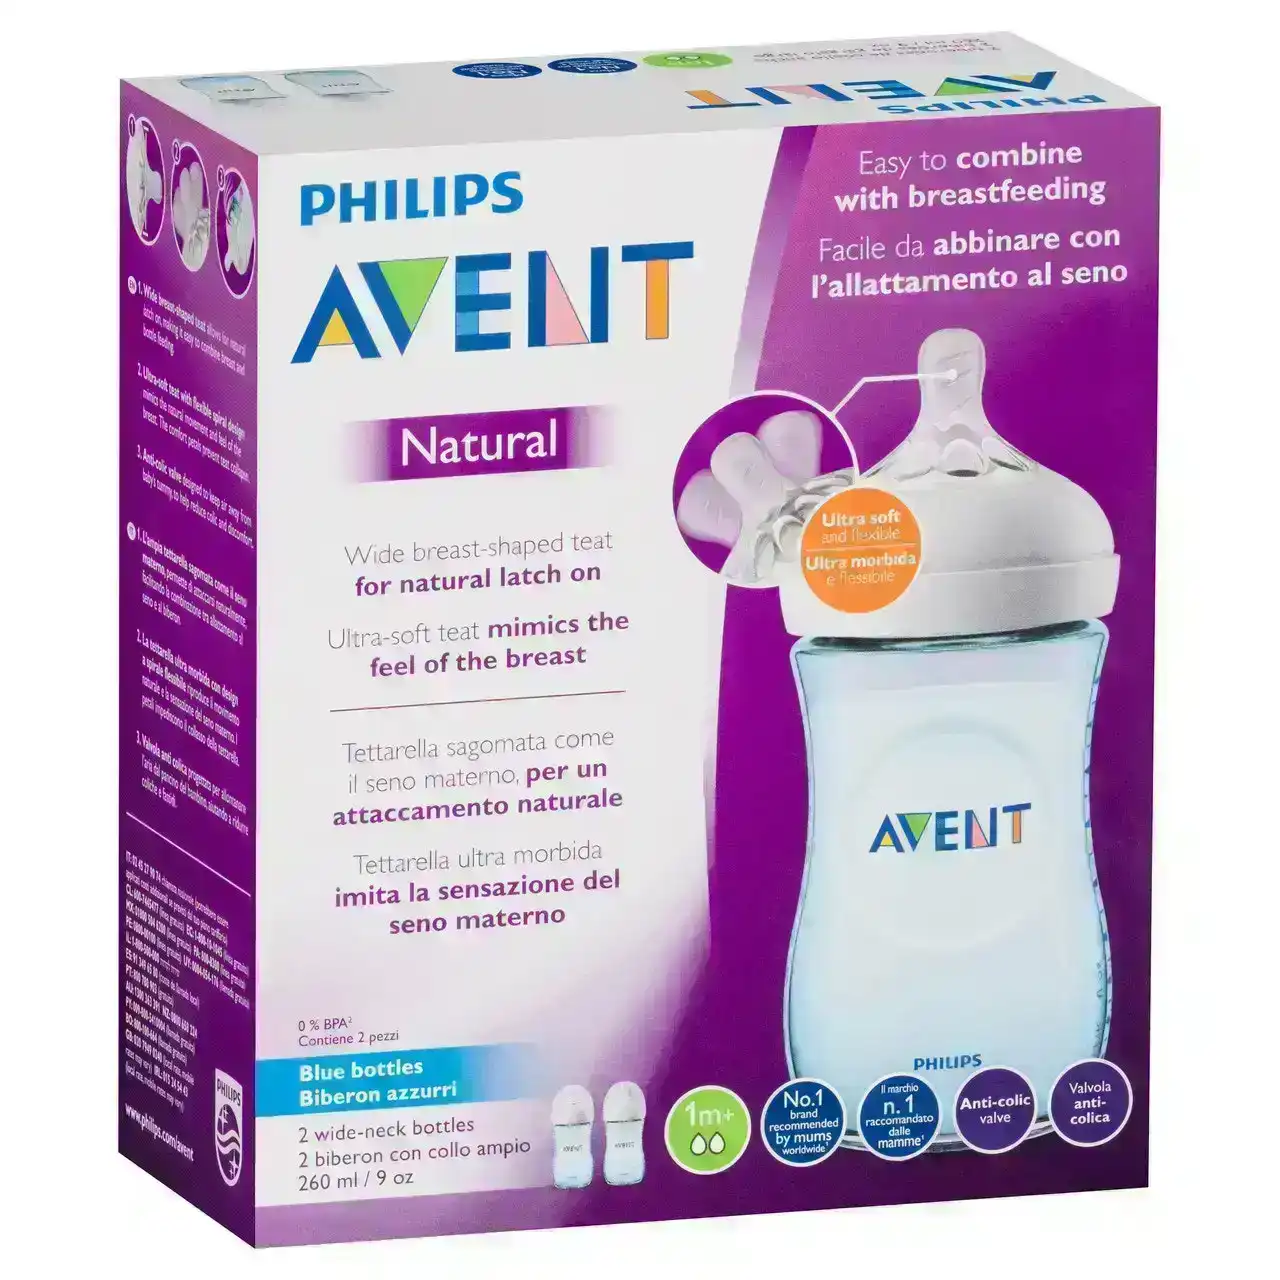 Philips Avent Natural Wide-Neck Bottles Blue 1m+ 2 x 260mL